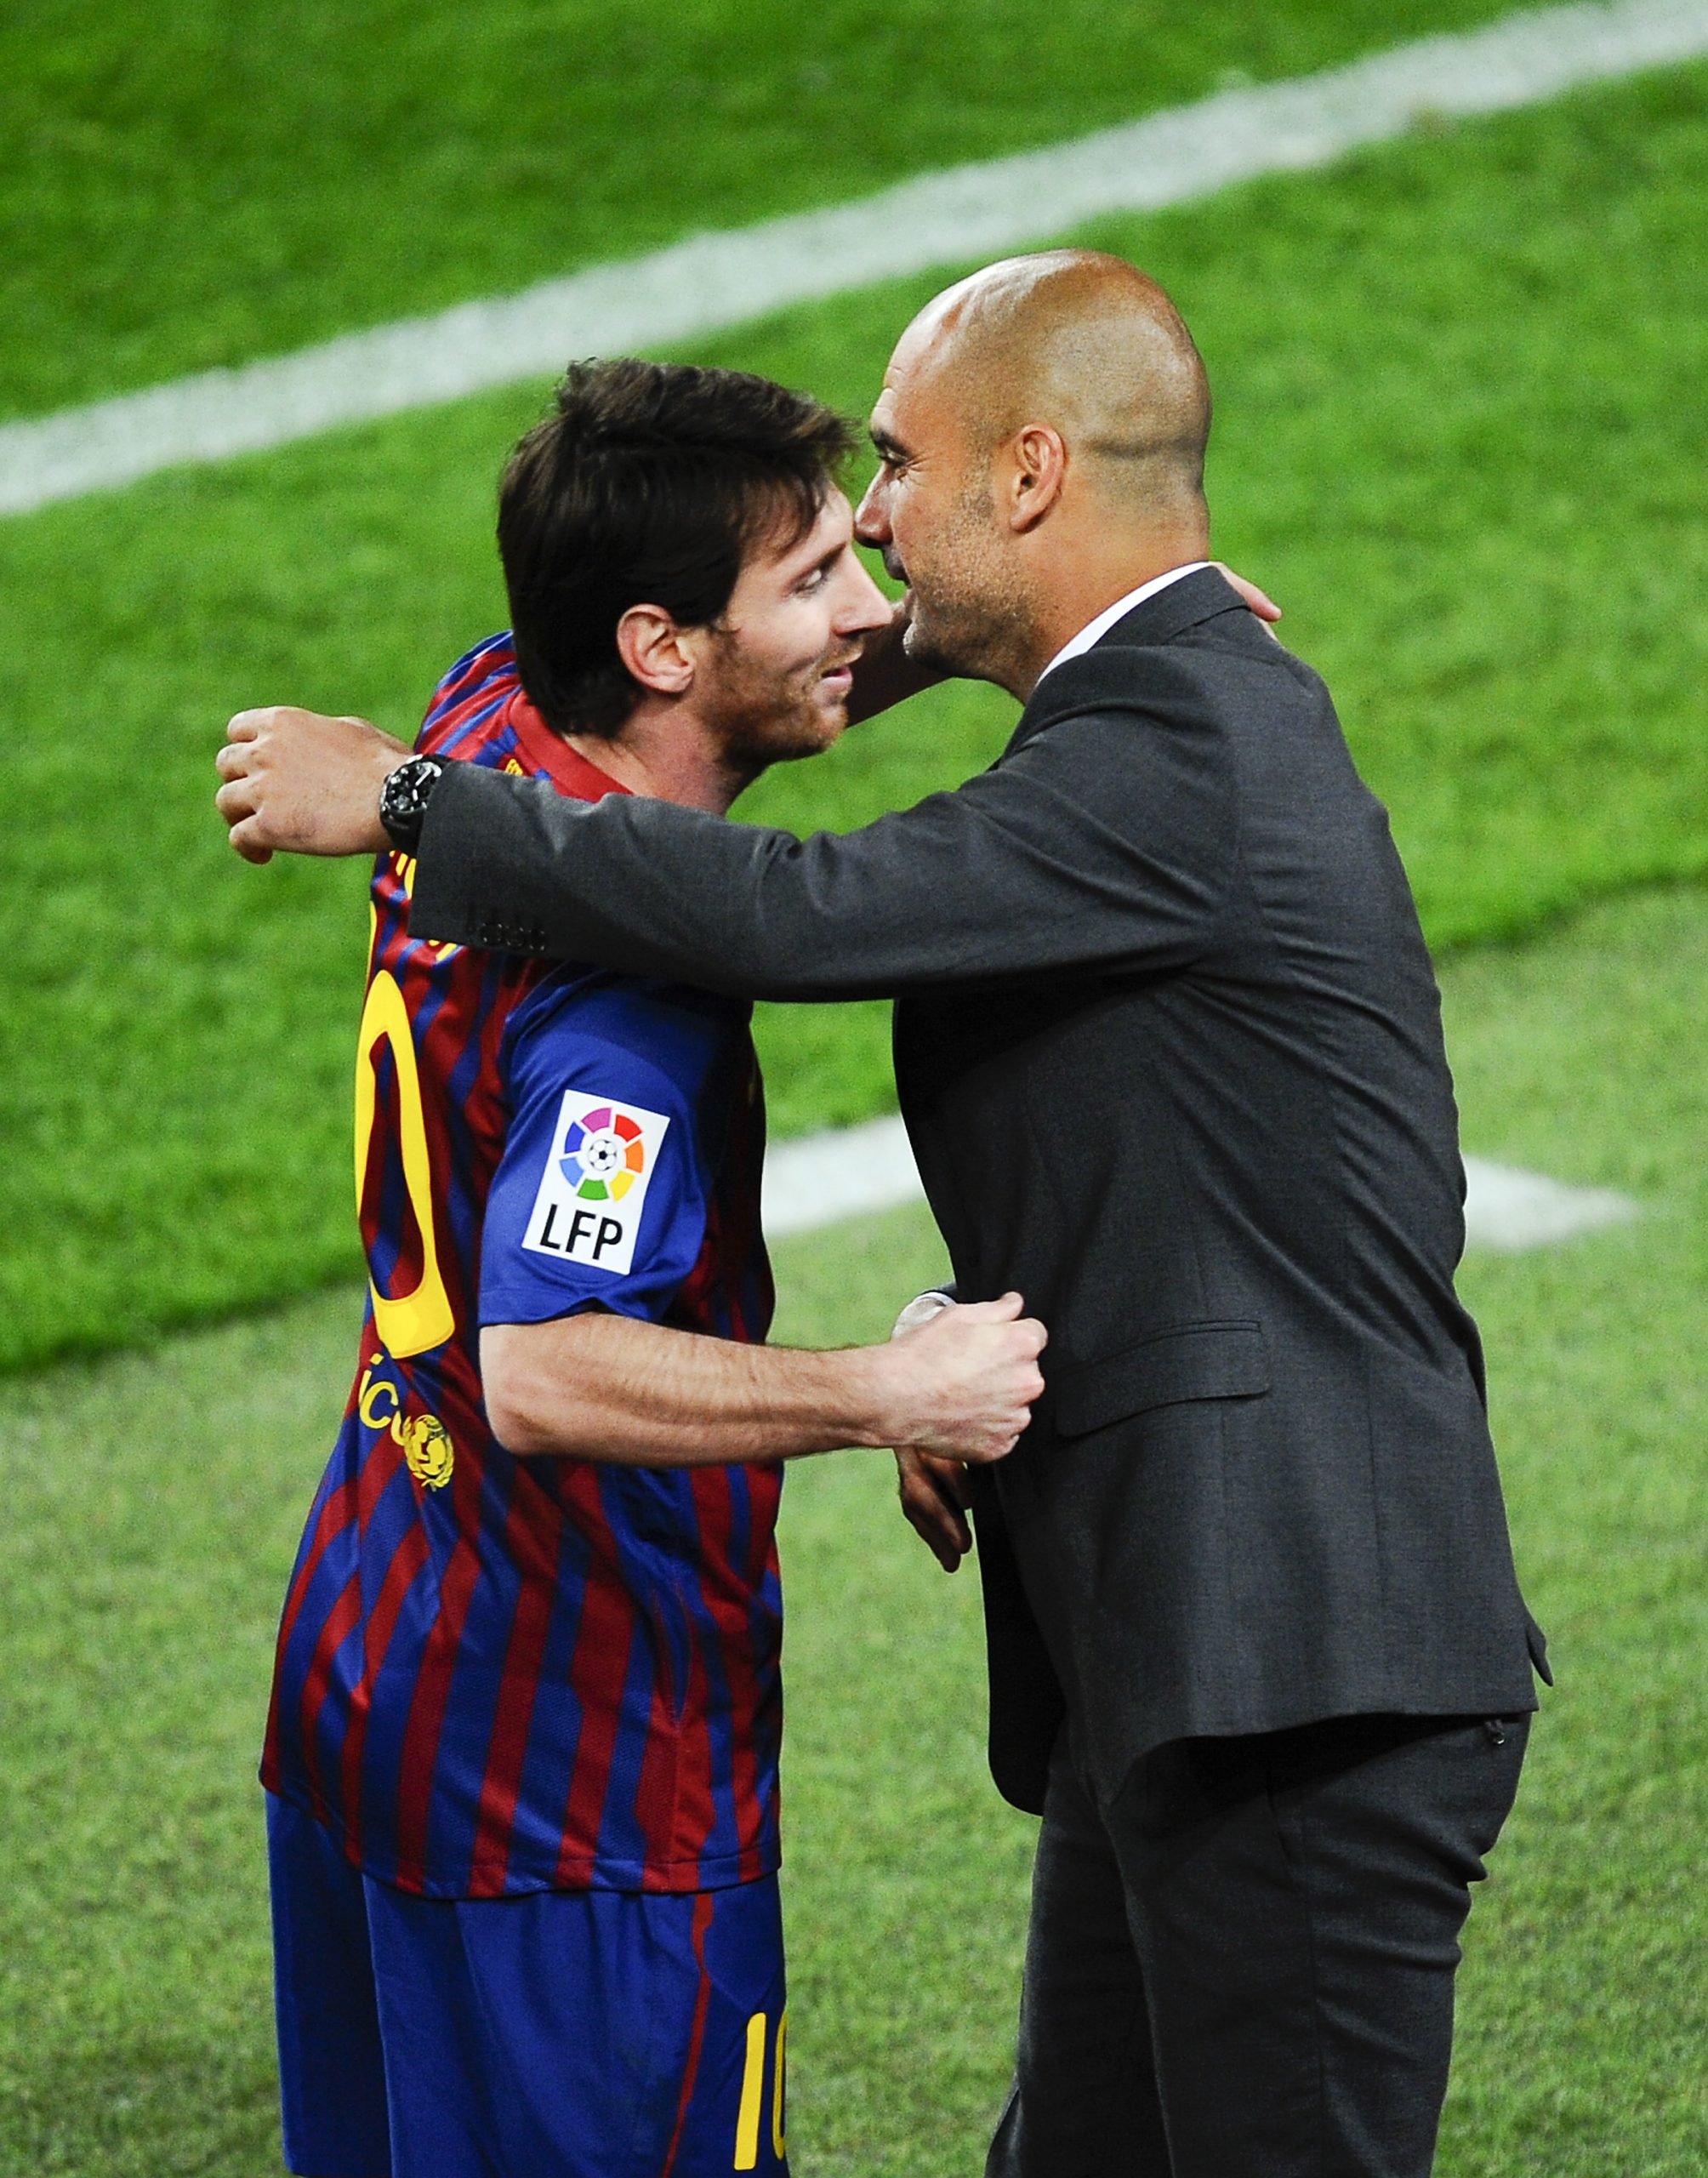 Pep Guardiola still wants Lionel Messi to end his career at B  manchester united jersey original  arcelona